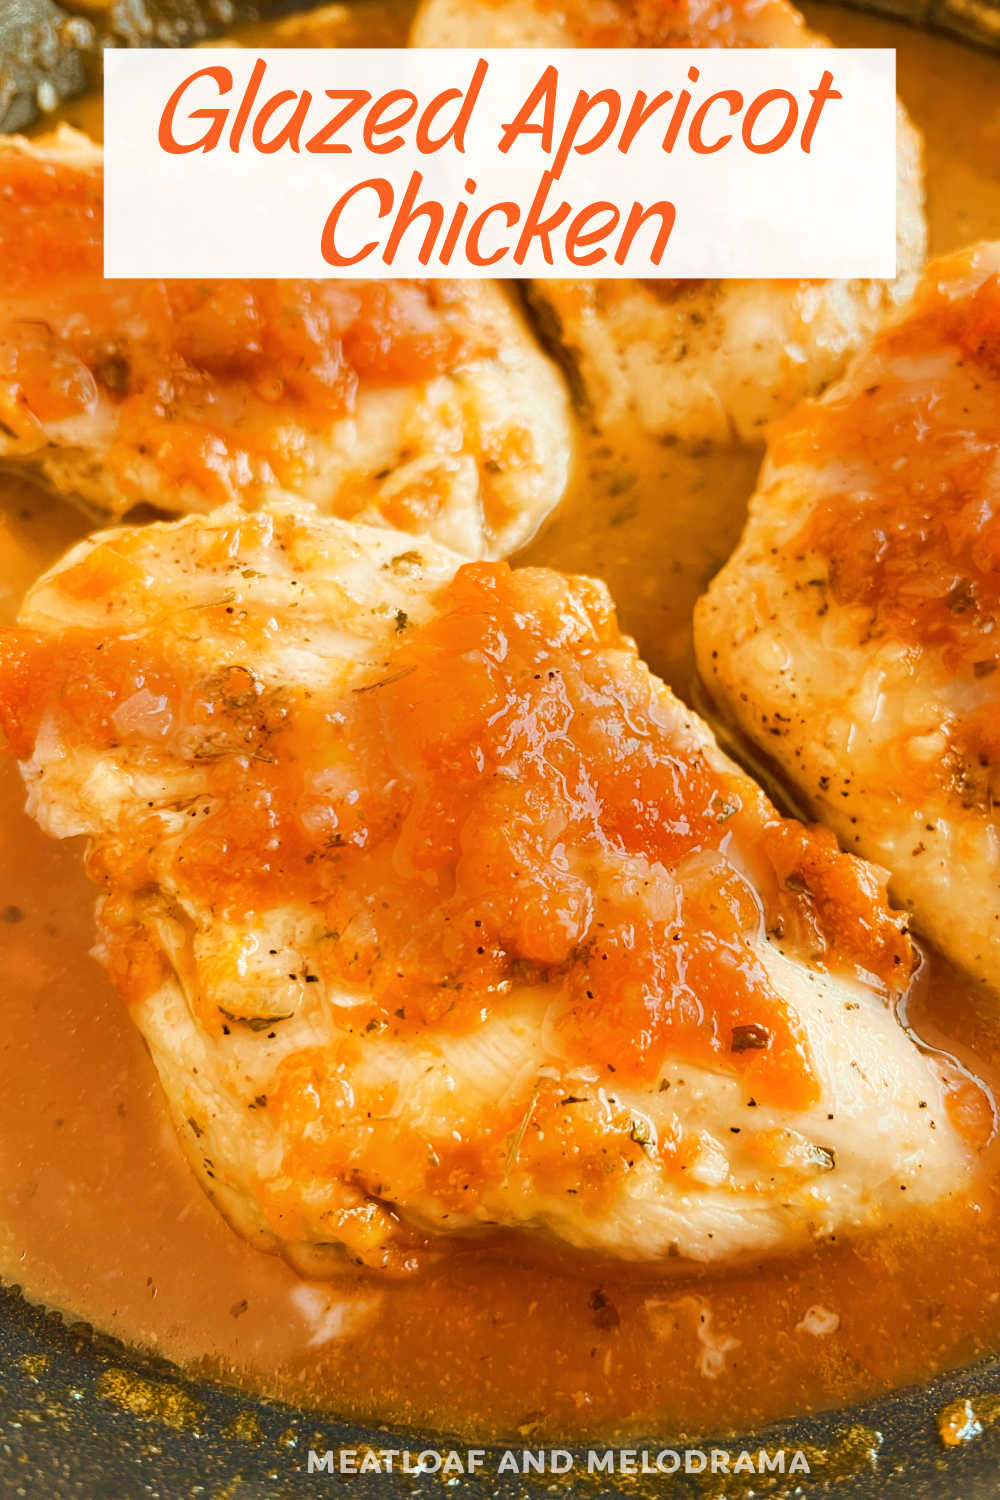 This Skillet Glazed Apricot Chicken Recipe is made with tender chicken breasts cooked in a delicious apricot glaze. An easy recipe for busy weeknights that the whole family loves! via @meamel